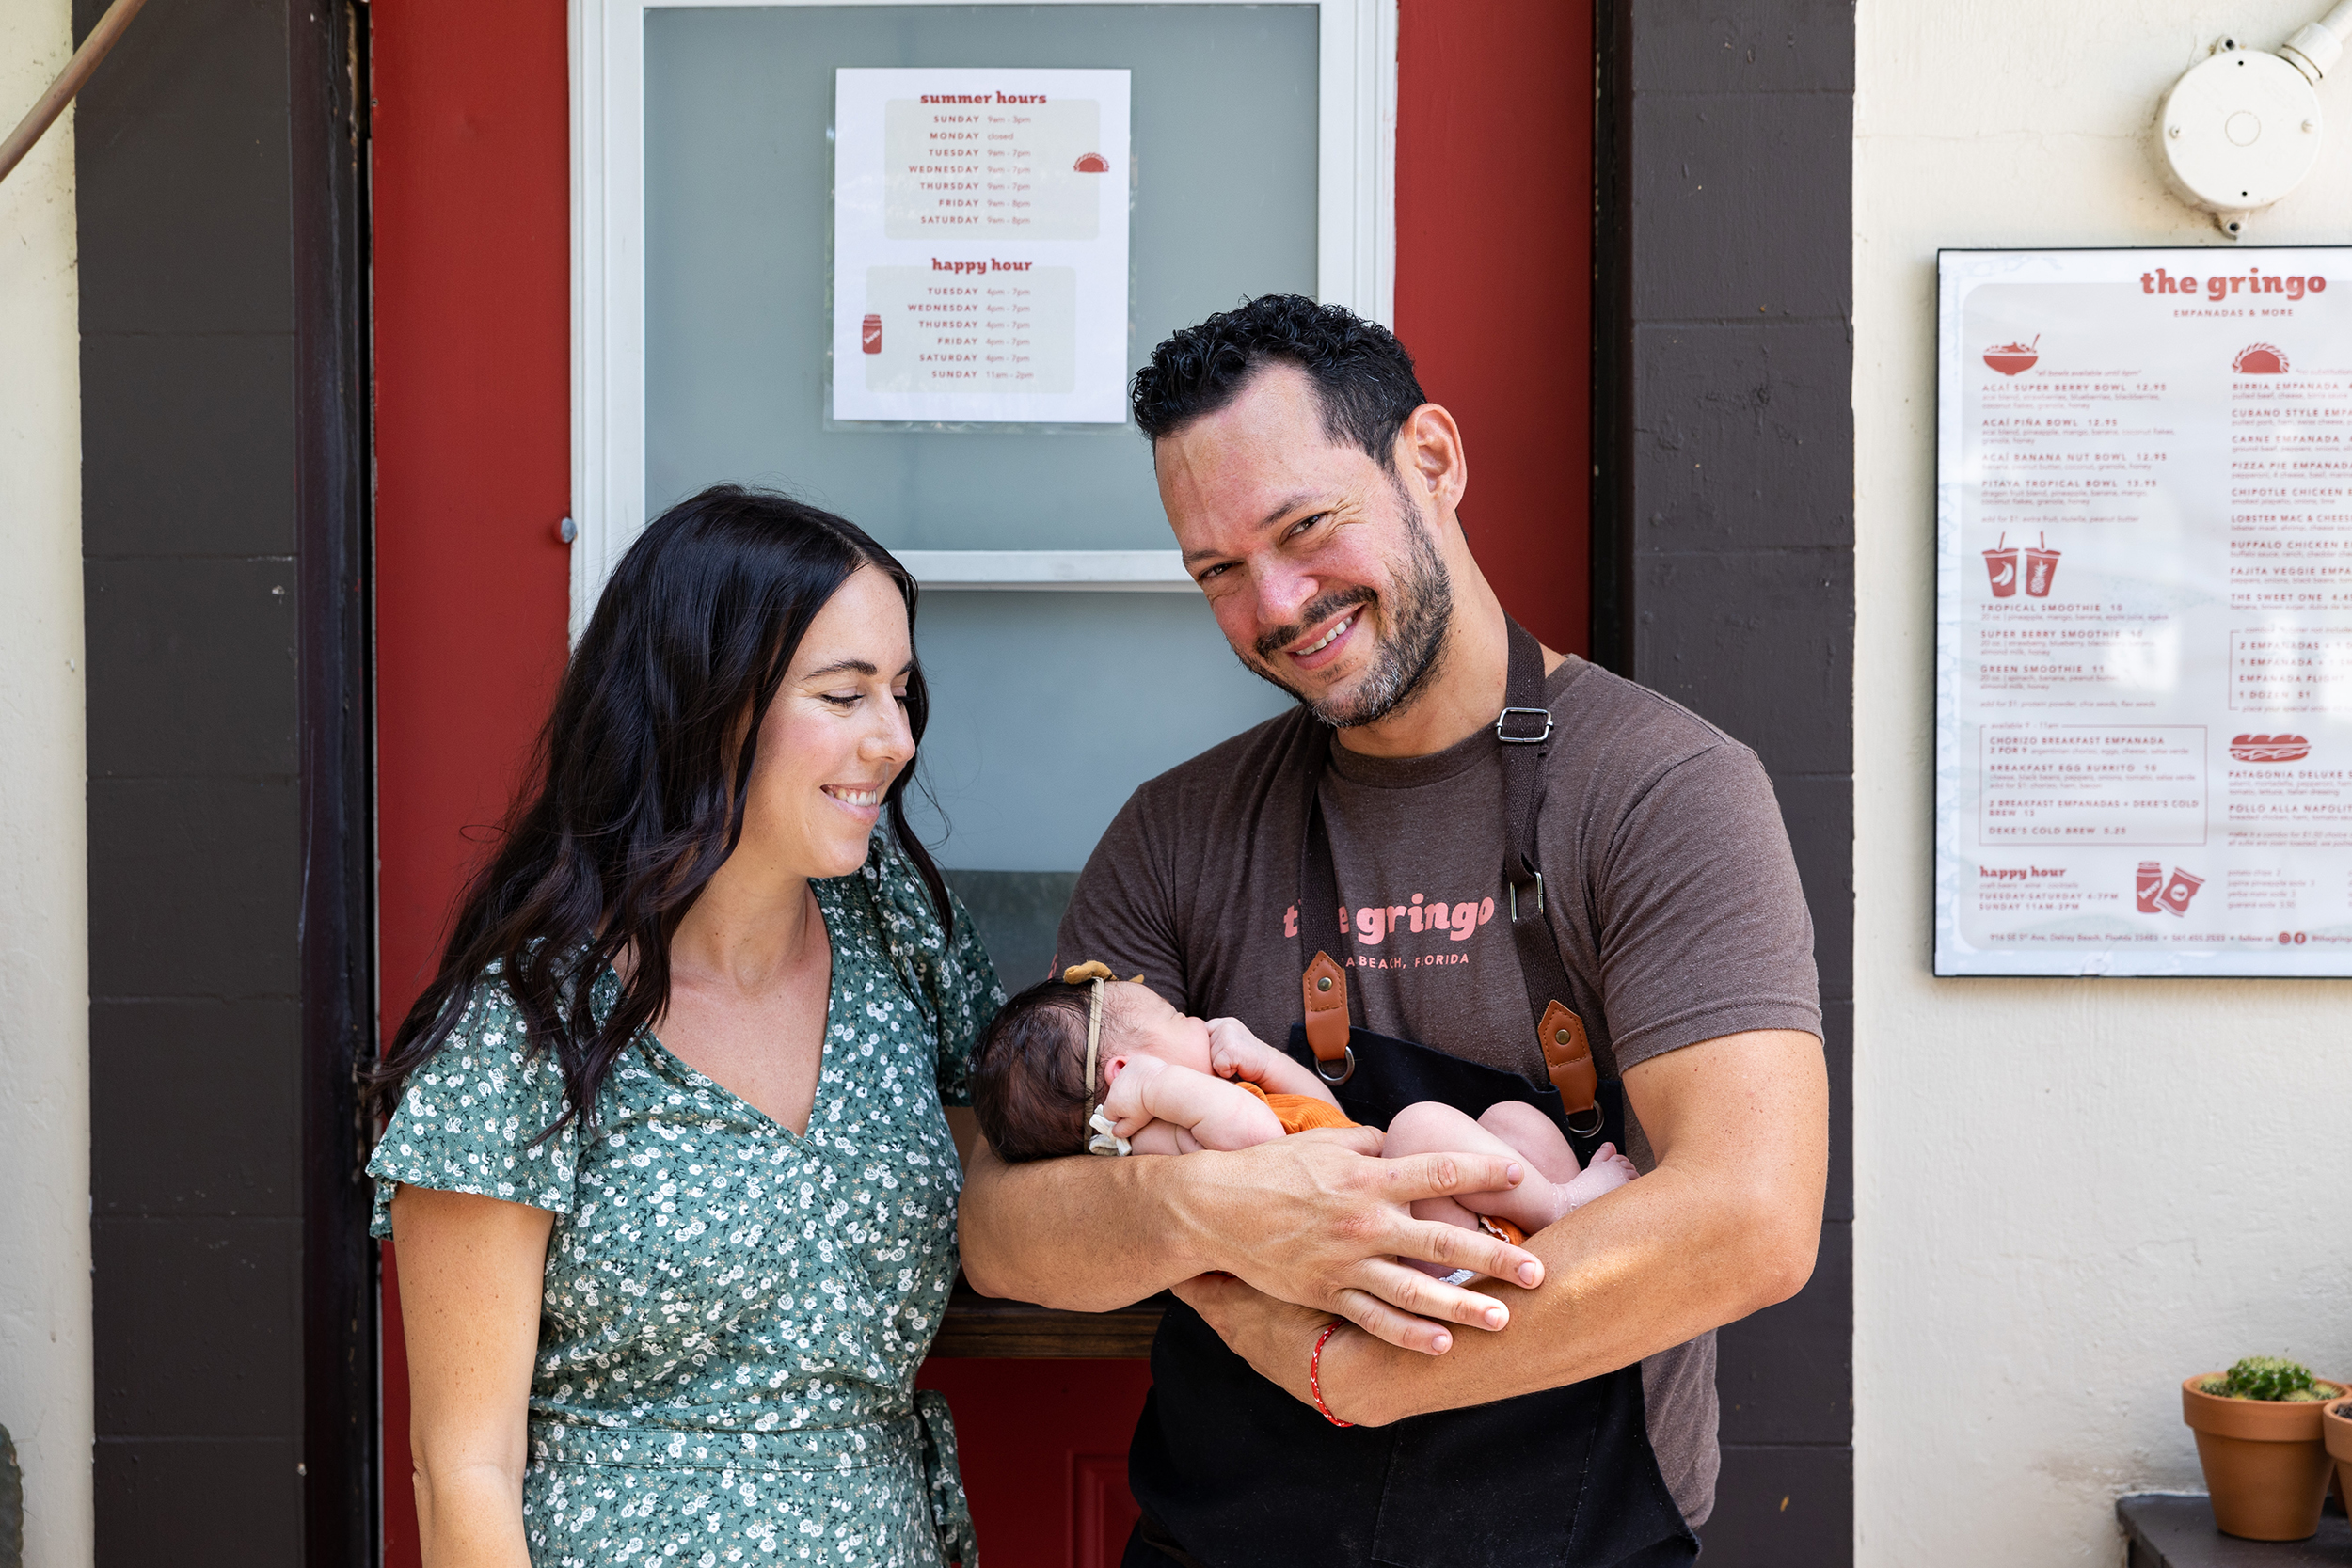 Owner and chef of The Gringo in Delray Beach with wife, Kimberly, and newborn baby. 